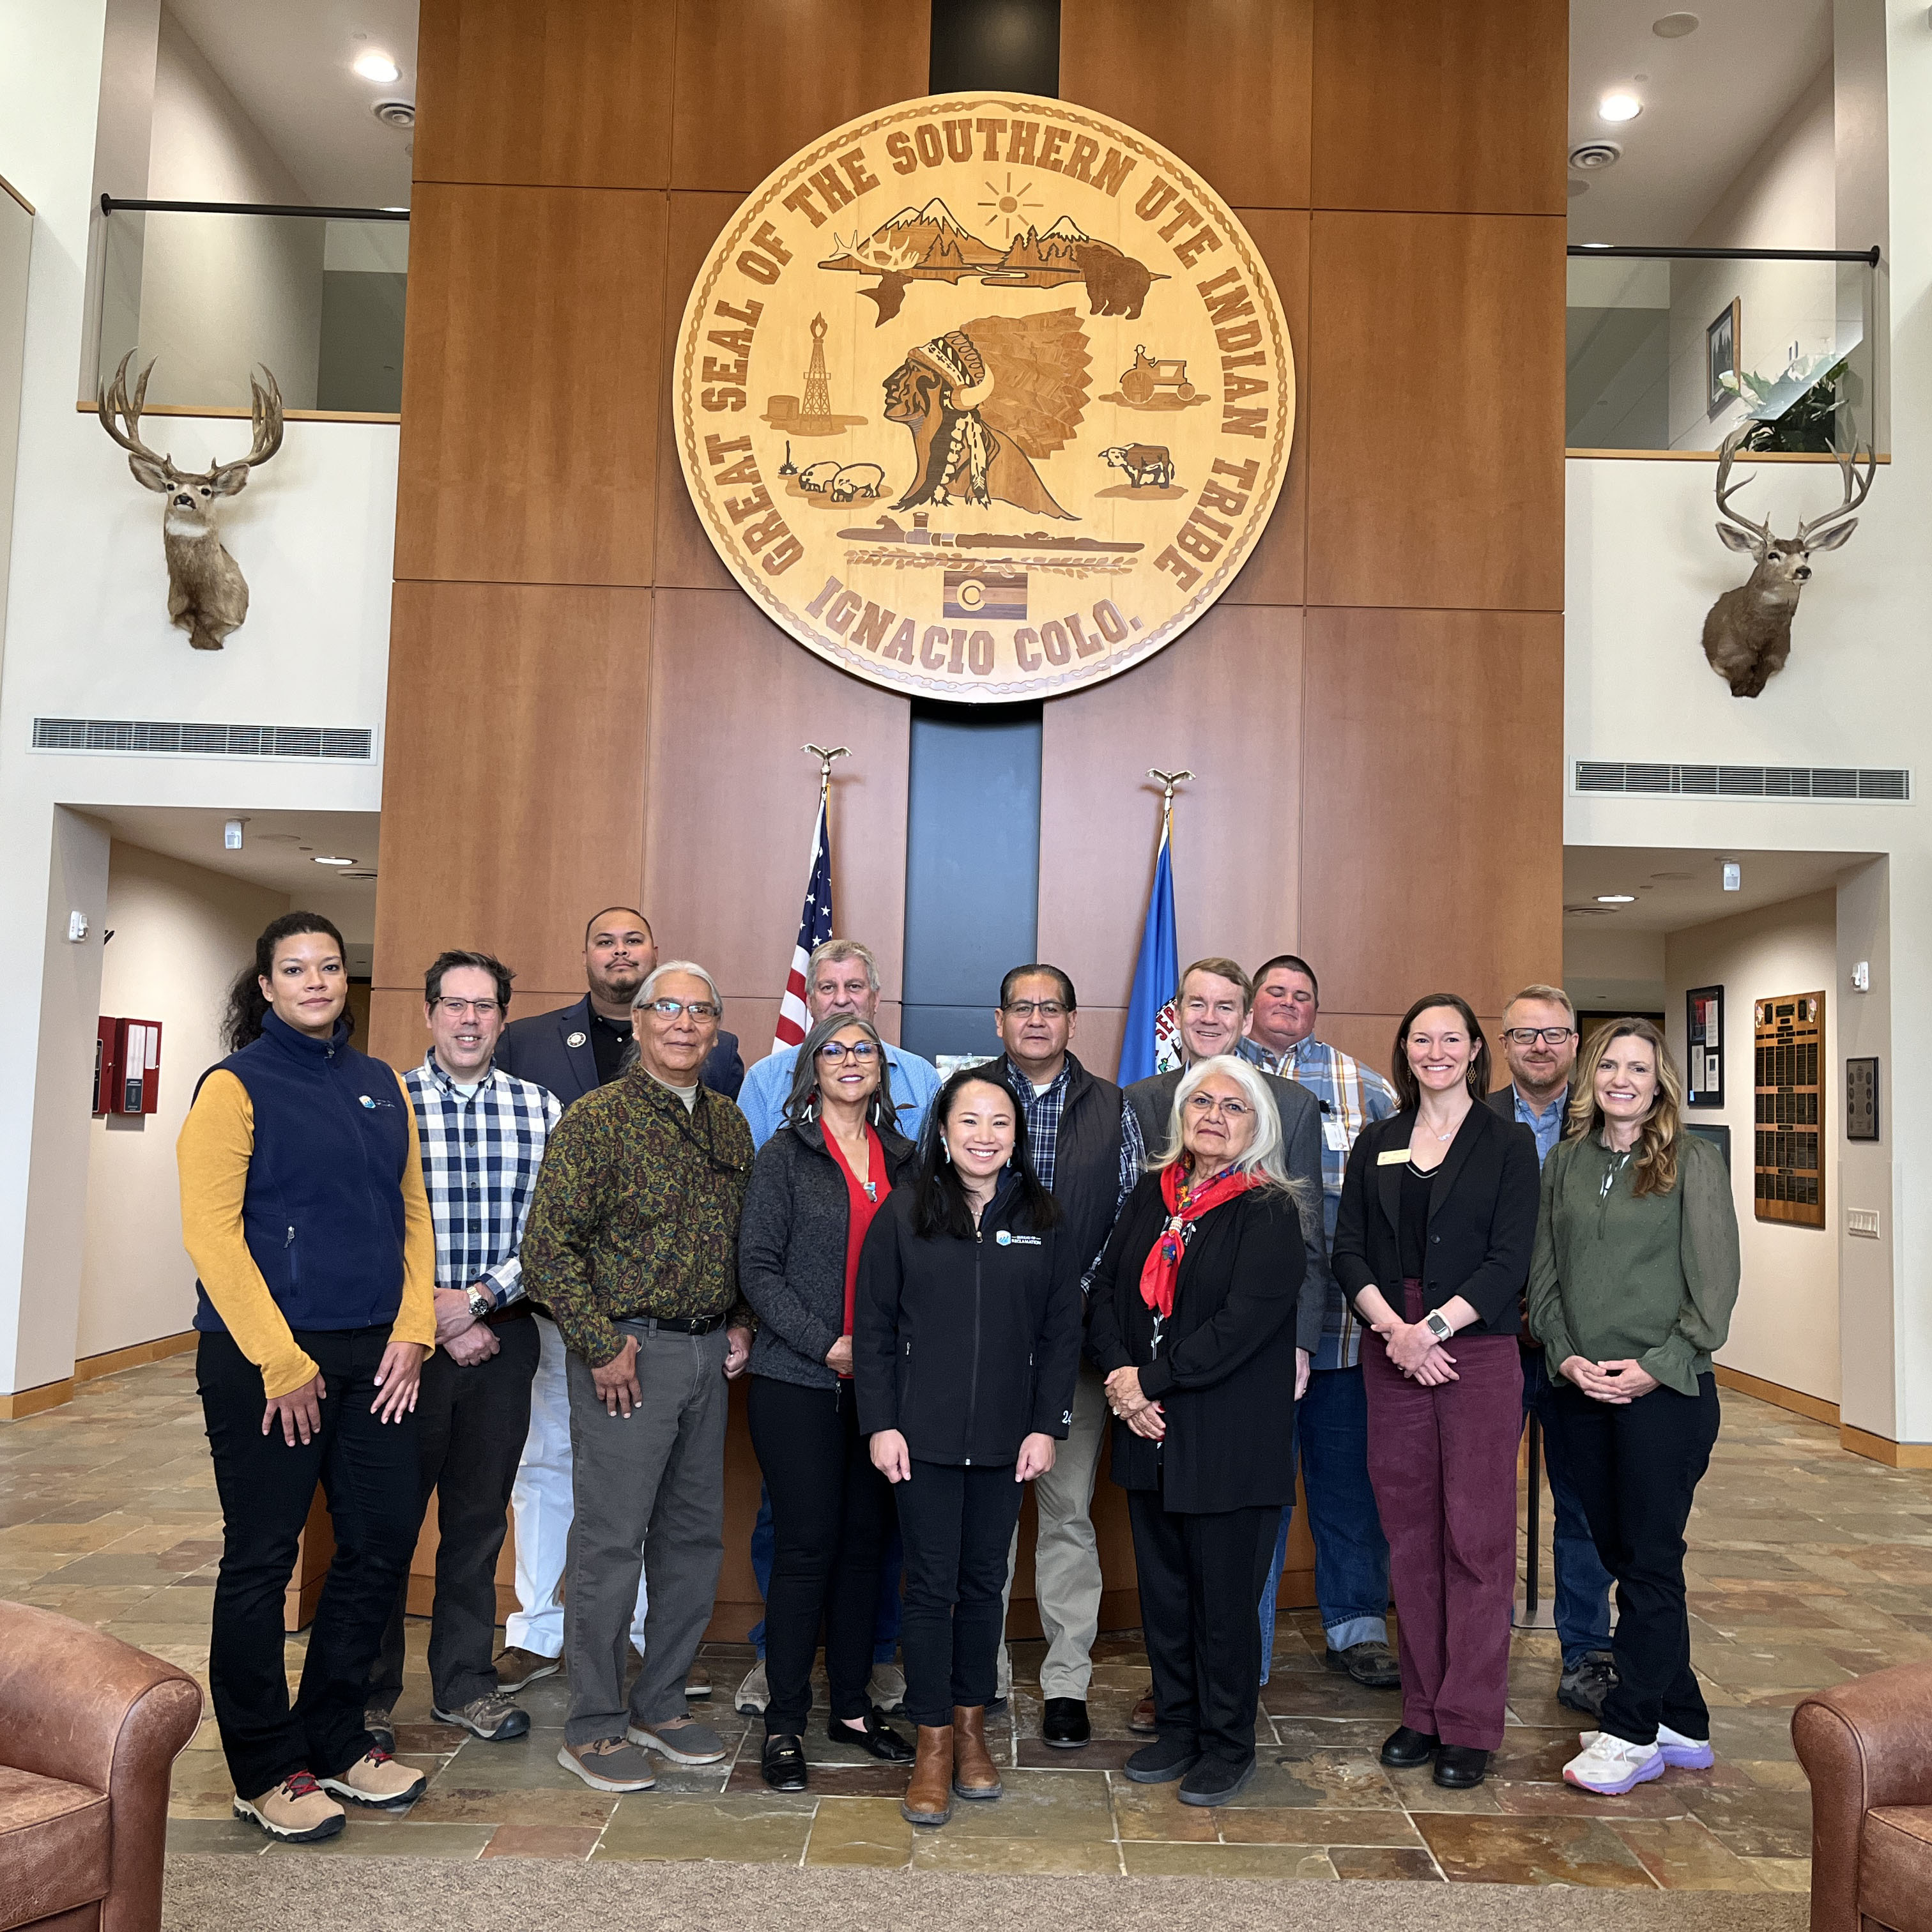 A group of people standing in a building in front of a big wall. On the wall is a large oval that says the Great Seal of the Southern Ute Indian Tribe in Ignacio, Colorado.